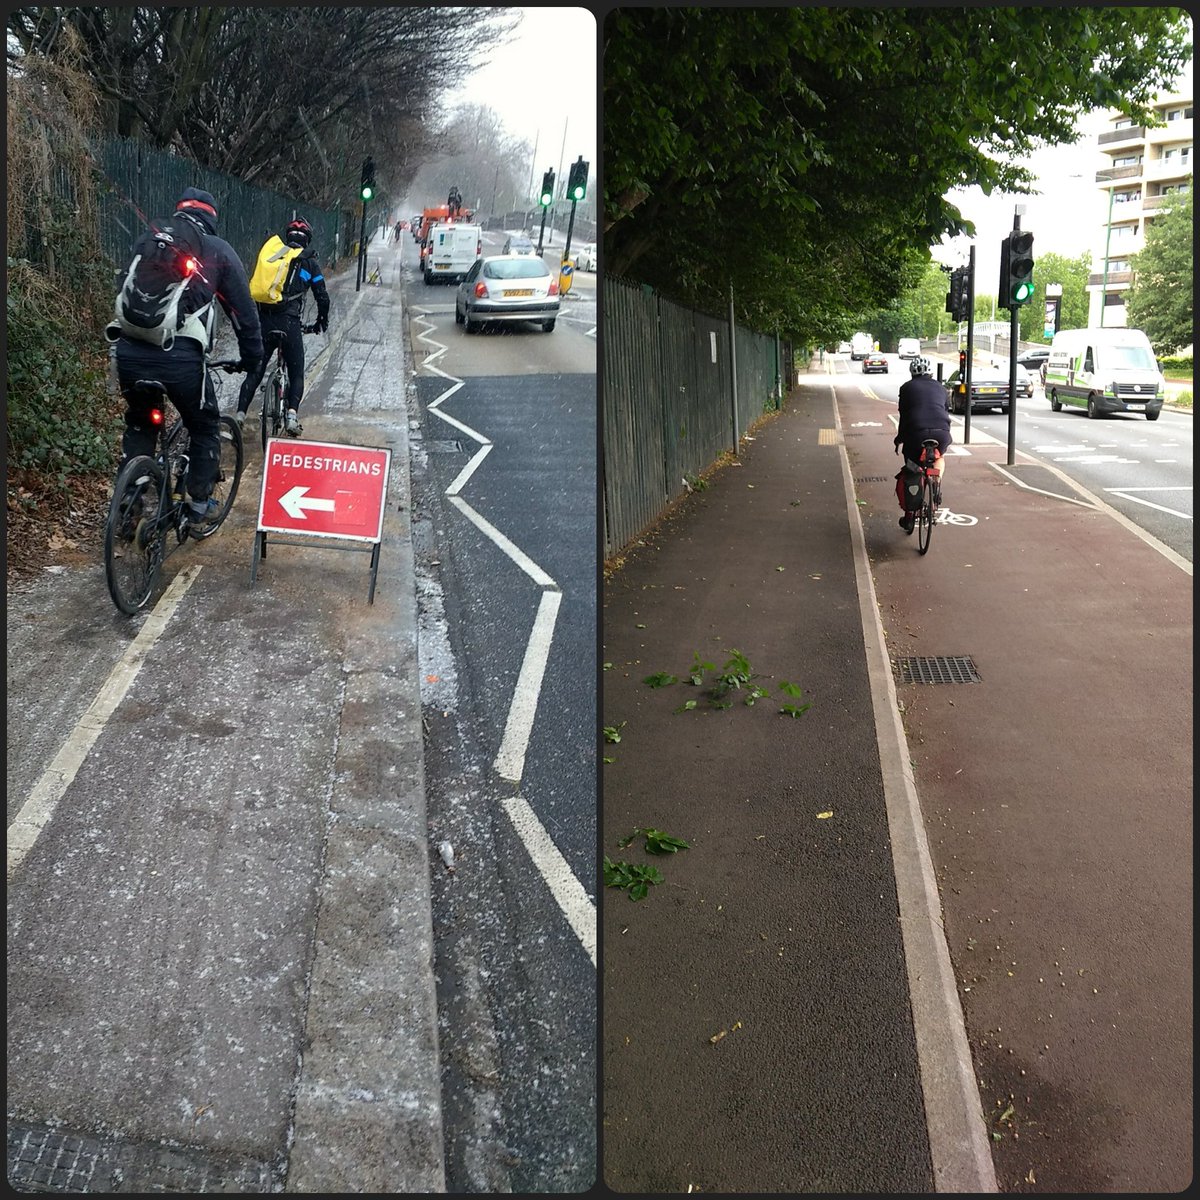 Then and Now IV - Narrow, split footway, overgrown & perpetually wet,  transformed, Picture looking towards border with Hackney. #PassingtheBatton #wfminiholland